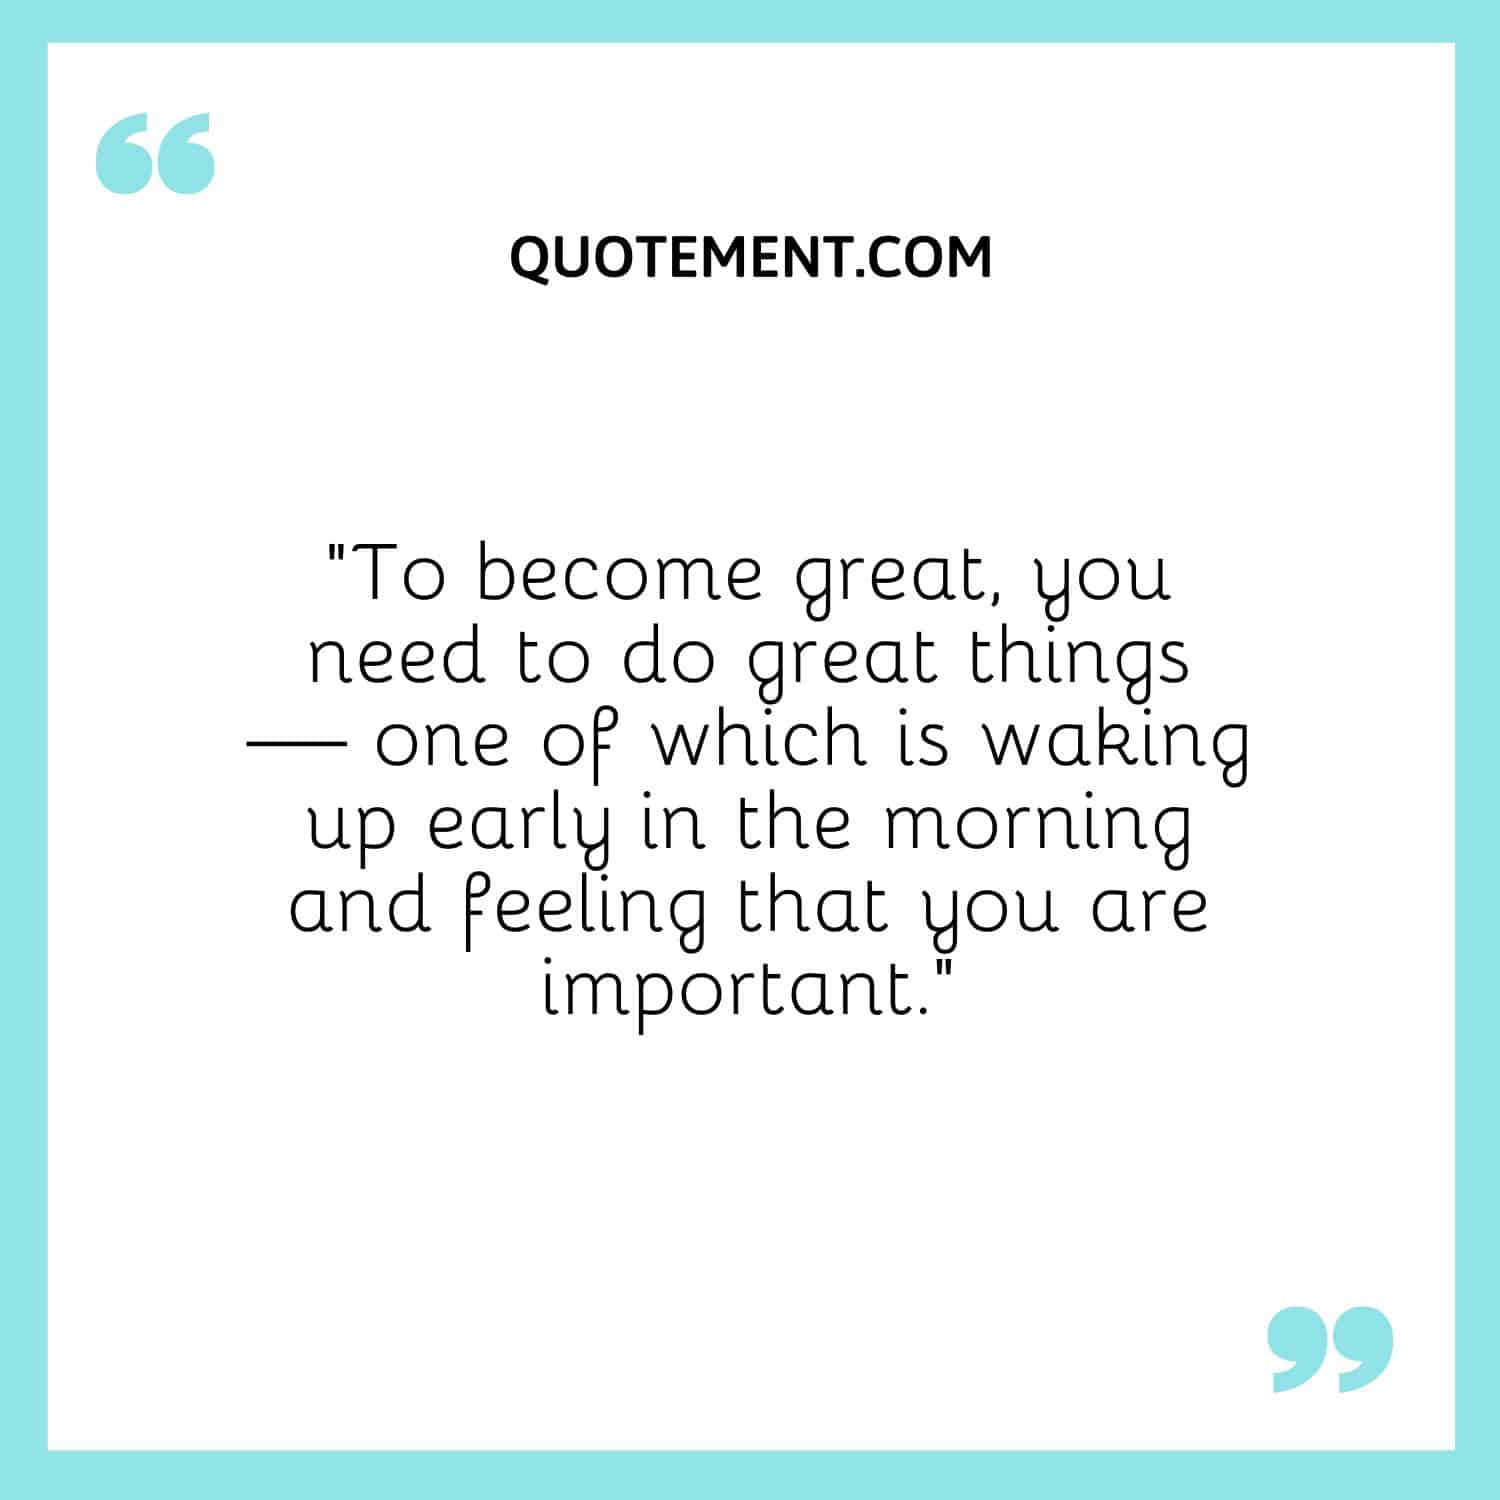 “To become great, you need to do great things — one of which is waking up early in the morning and feeling that you are important.”